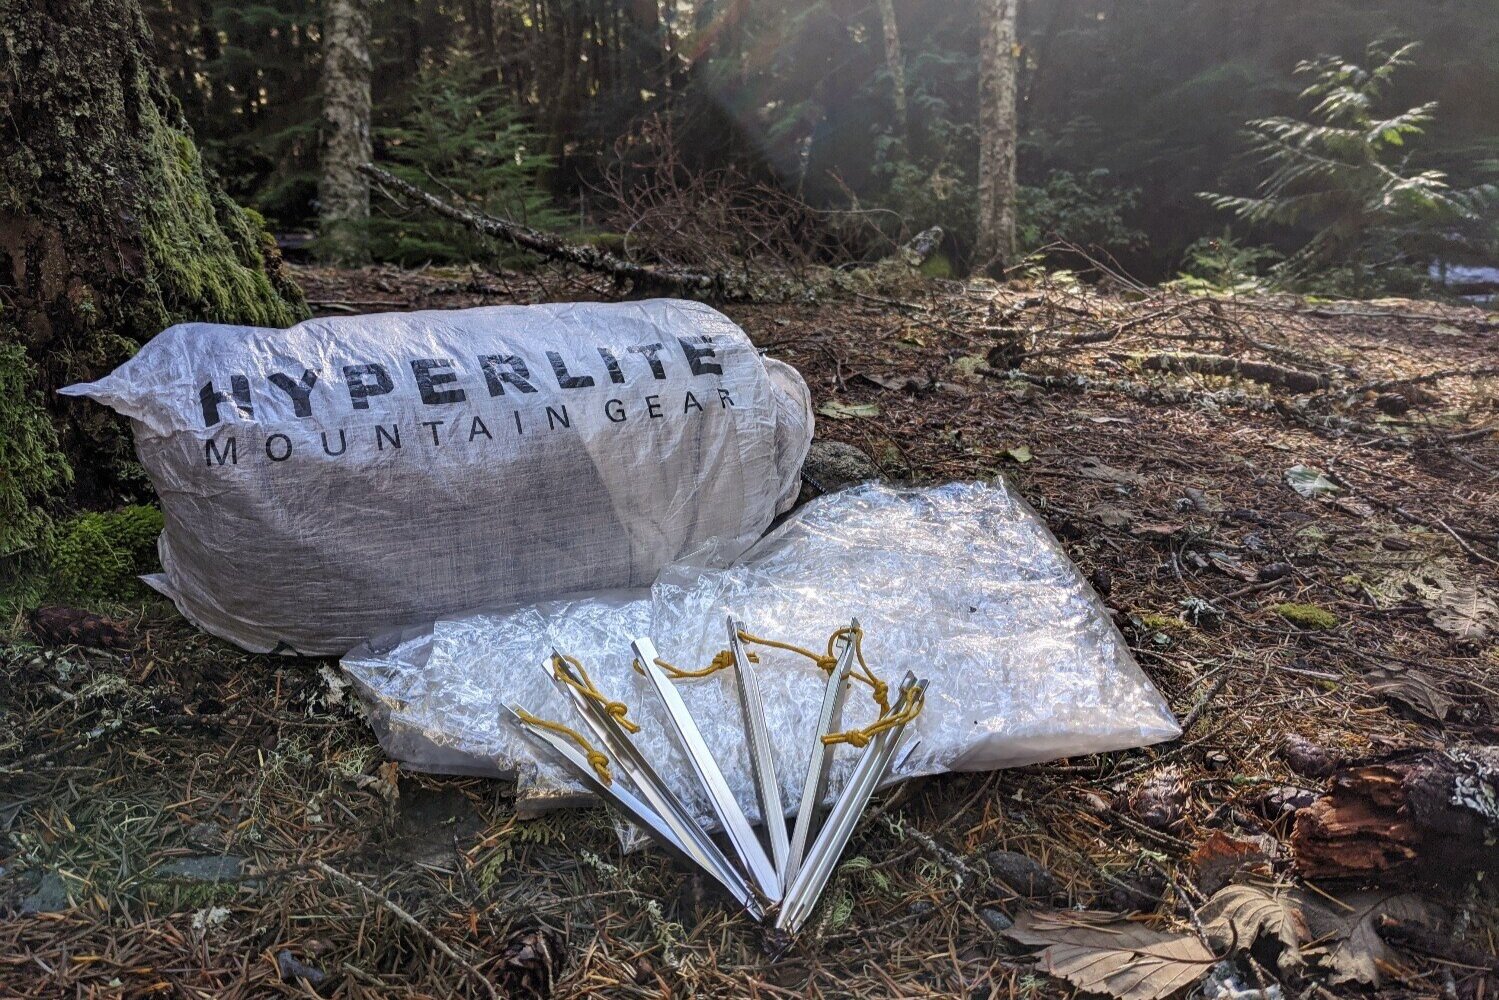 Polycro is a cheap ultralight option for use as floor with tarp tents like the Hyperlite Mountain Gear Ultamid 2.